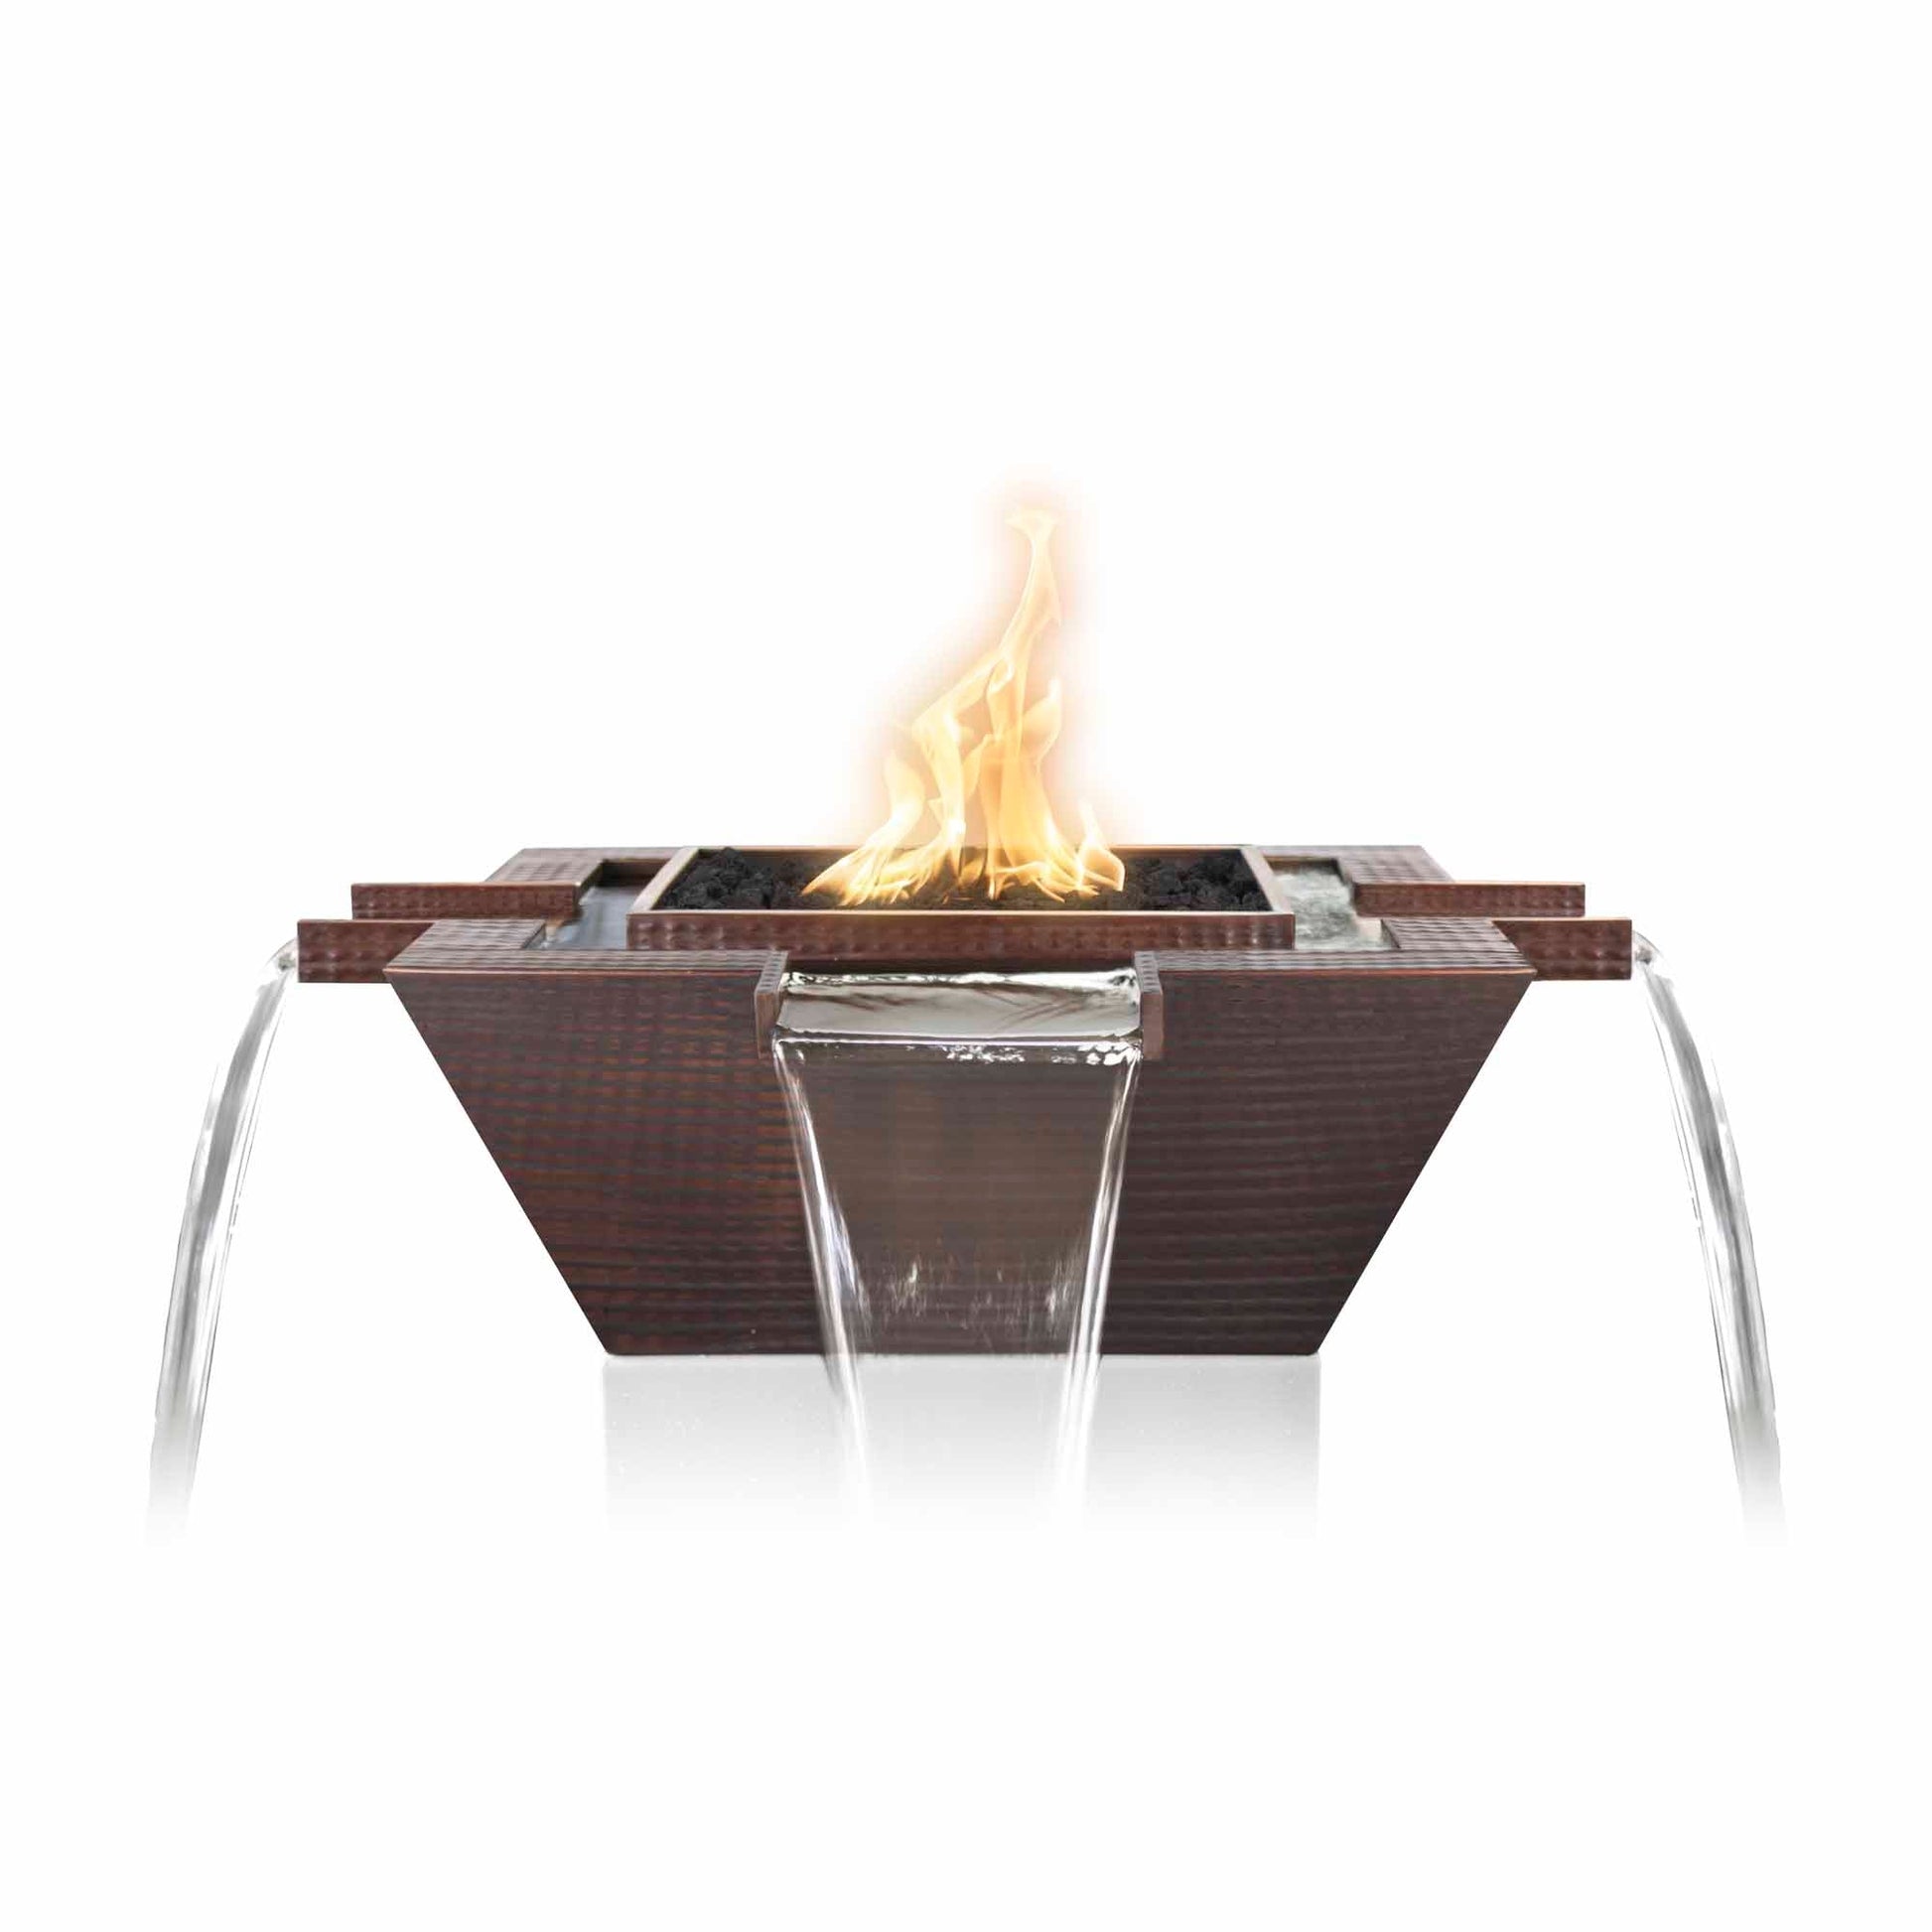 The Outdoor Plus Square Maya 36" Black Powder Coated Metal Liquid Propane Fire & Water Bowl 4-Way Spill with Match Lit Ignition